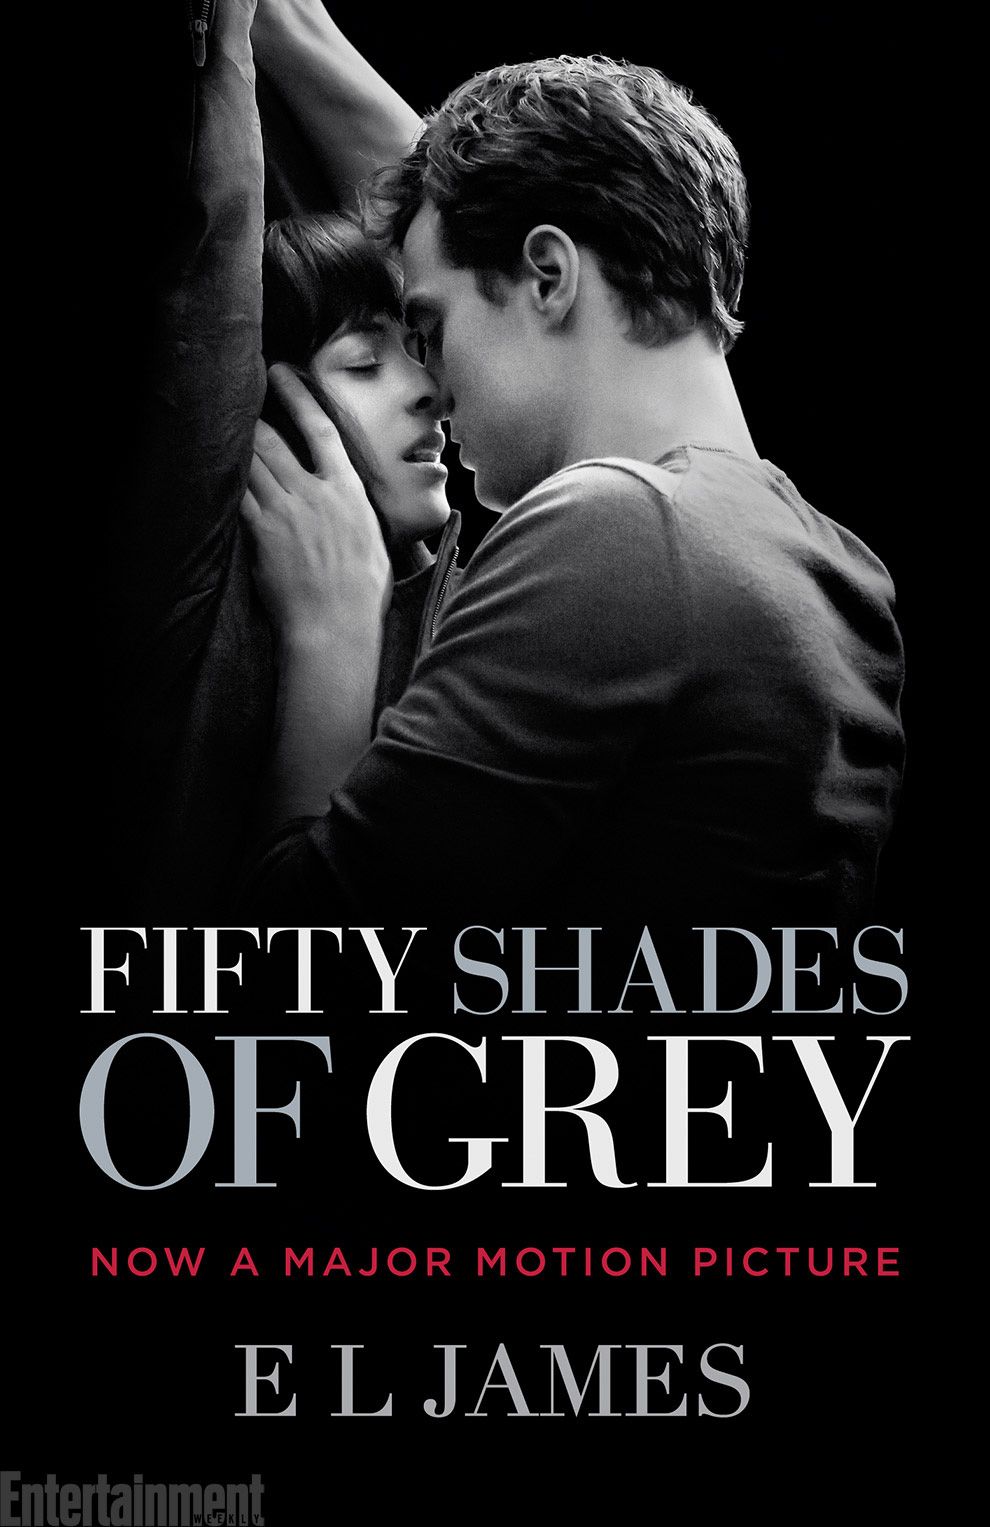 Fifty Shades of Grey Novel Cover